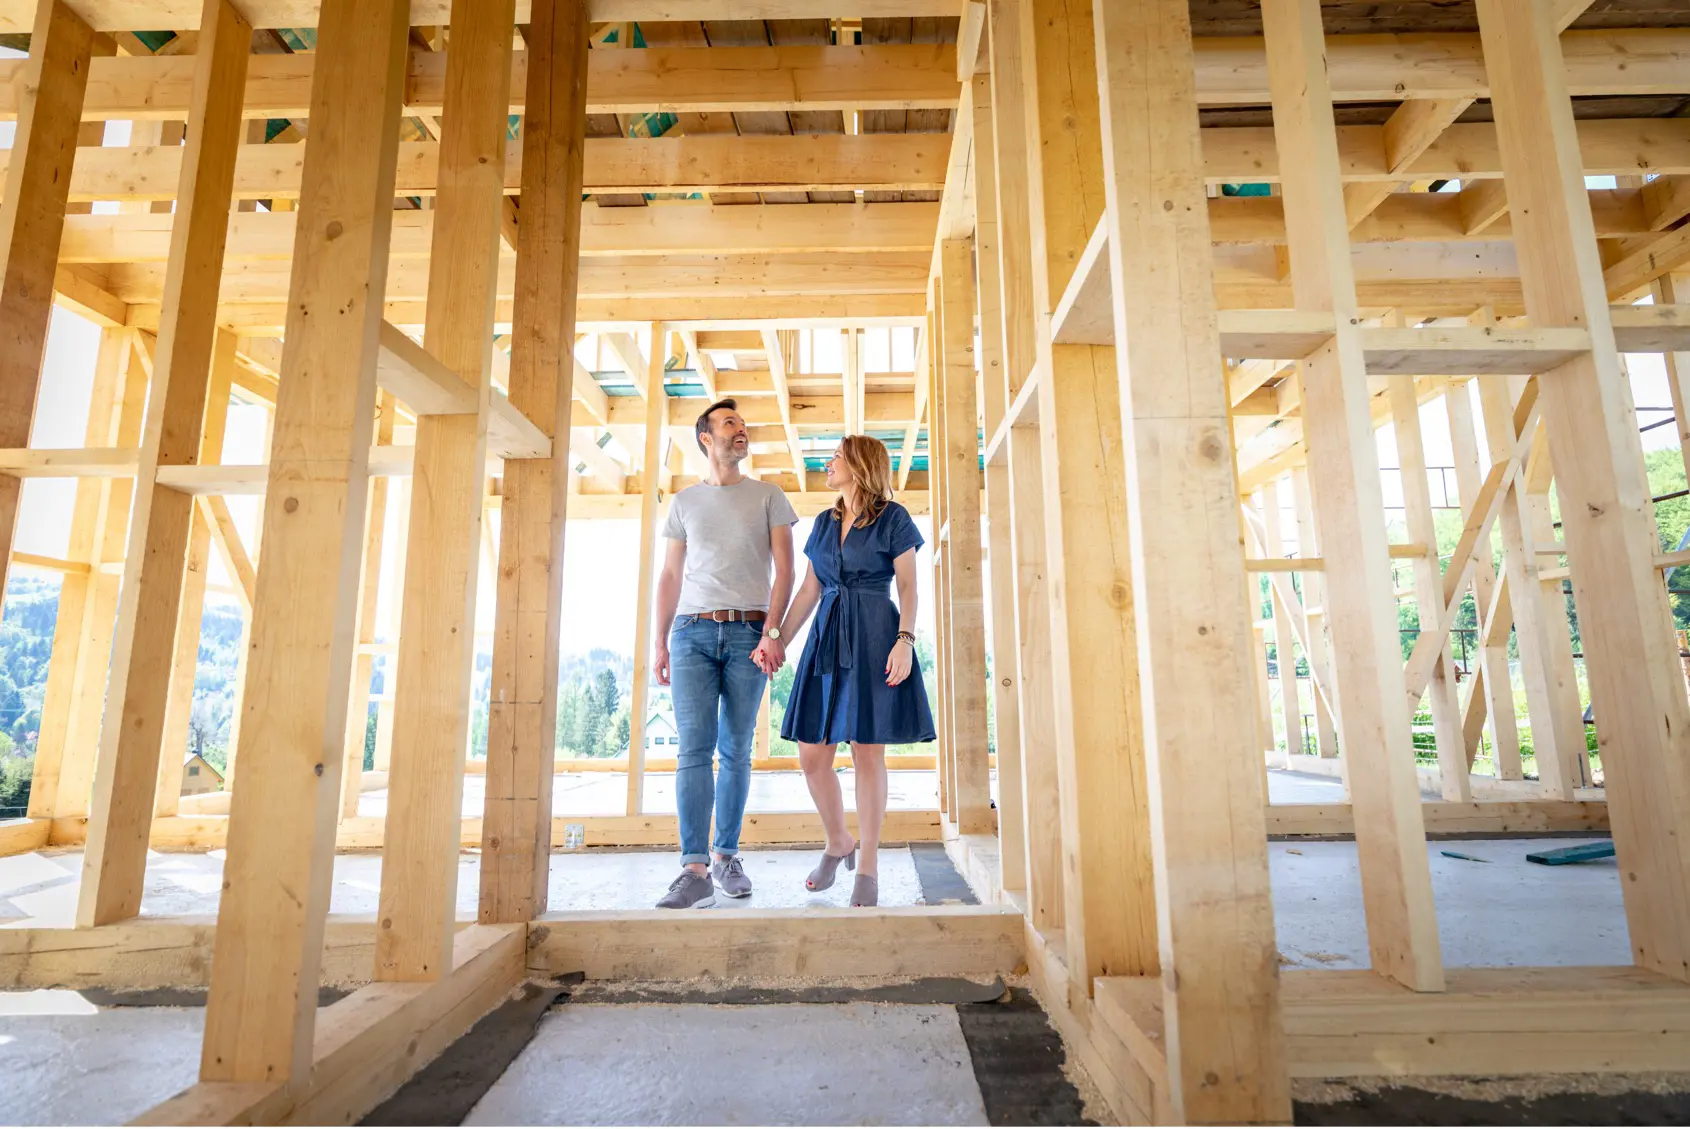 A couple smile and stand inside a timber frame of a house on a sunny day